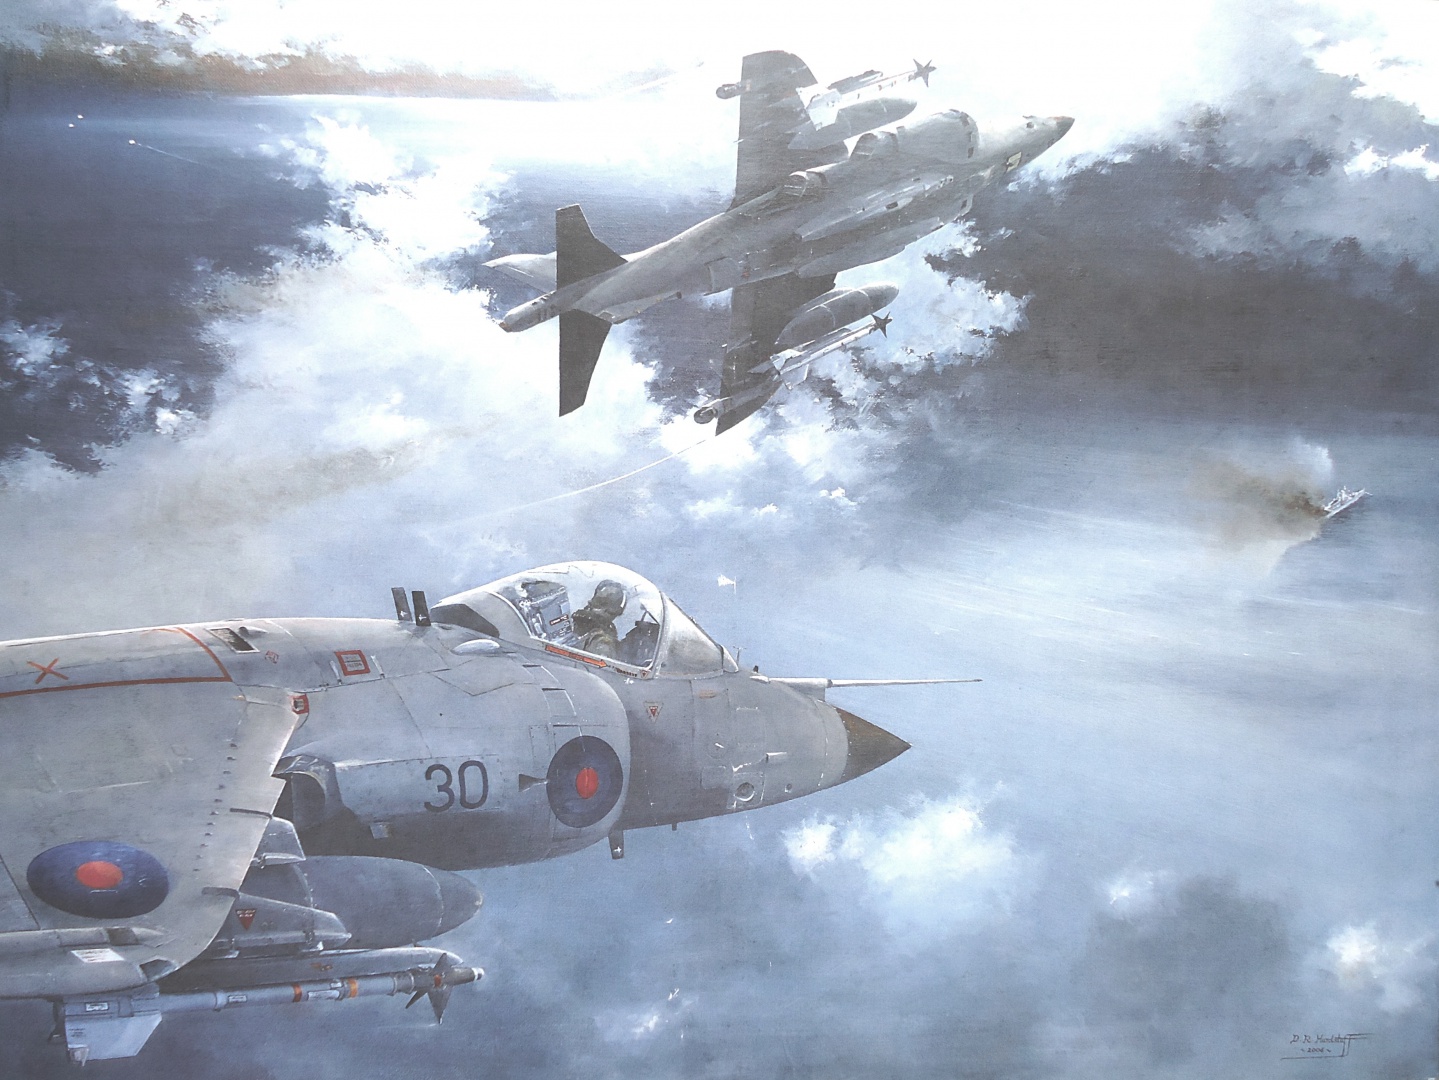 Harriers over the Falklands, May 1982